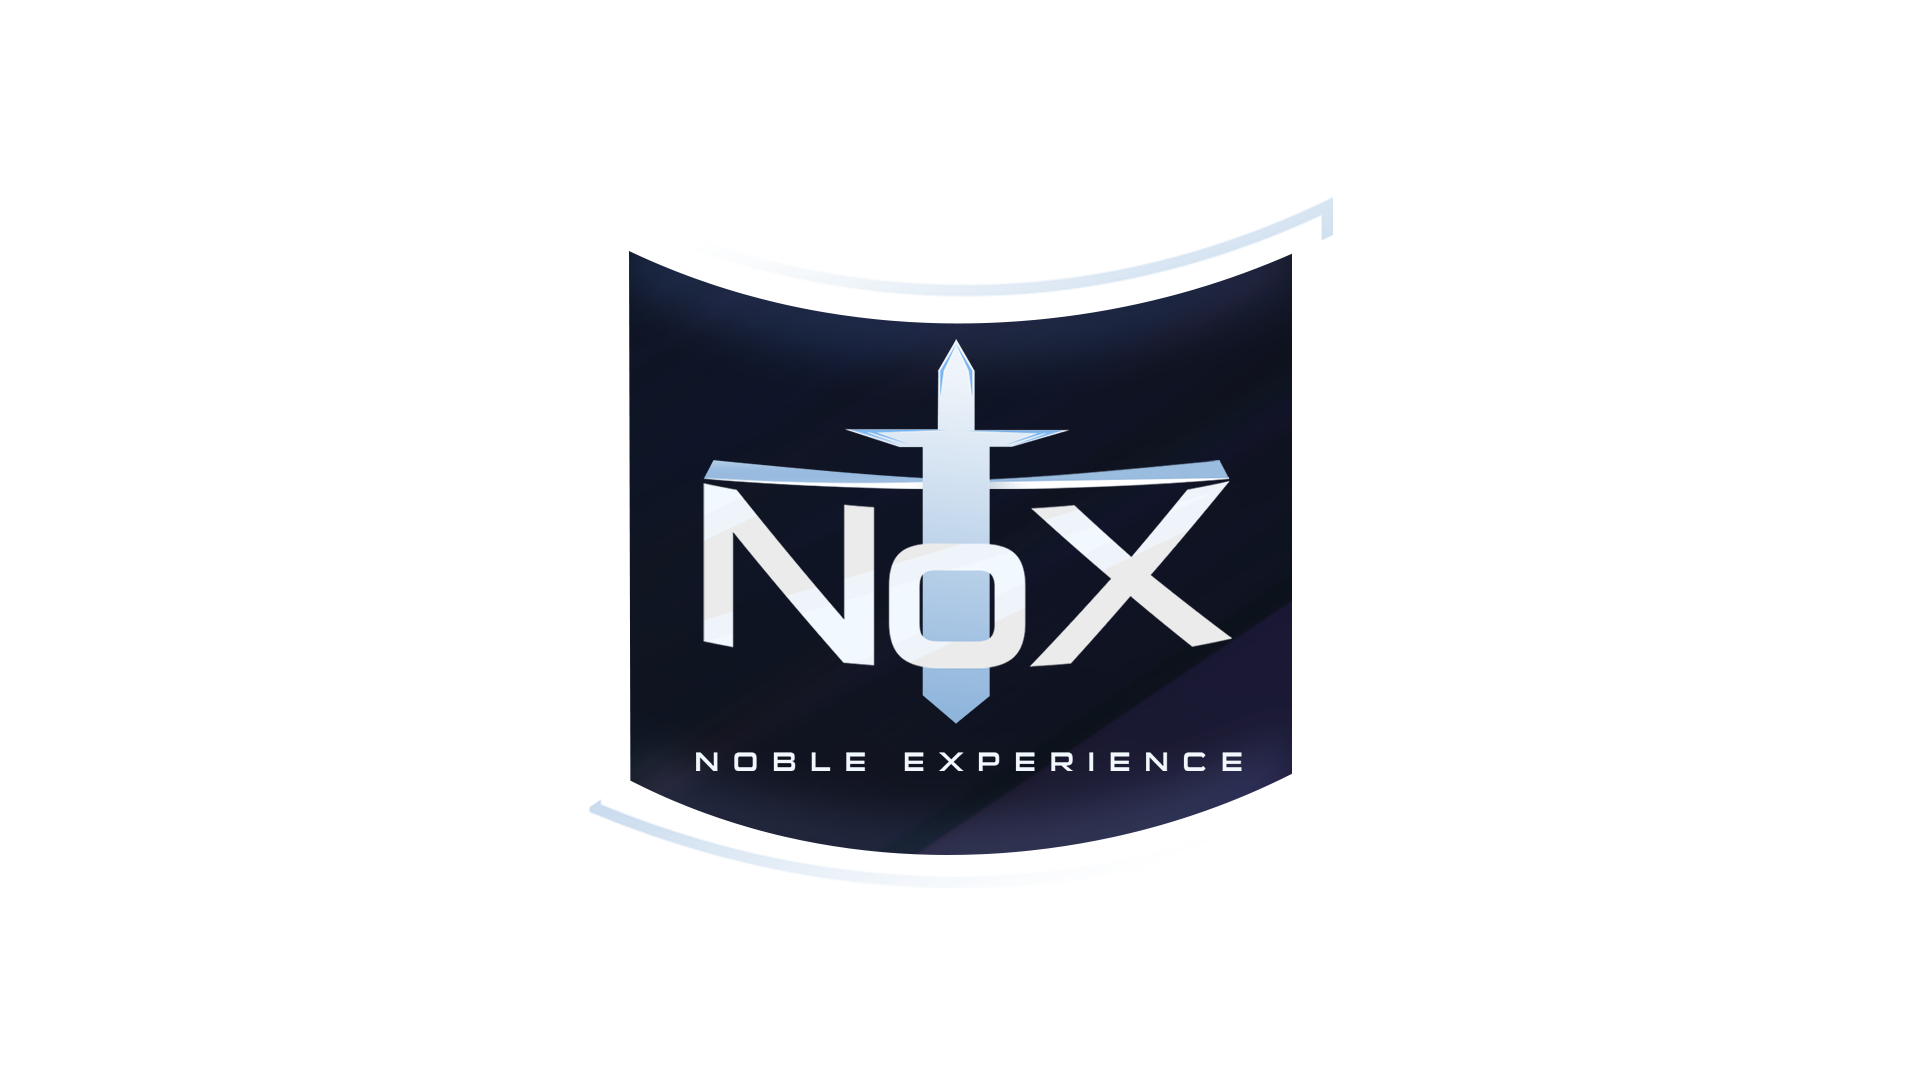 Noble eXperience